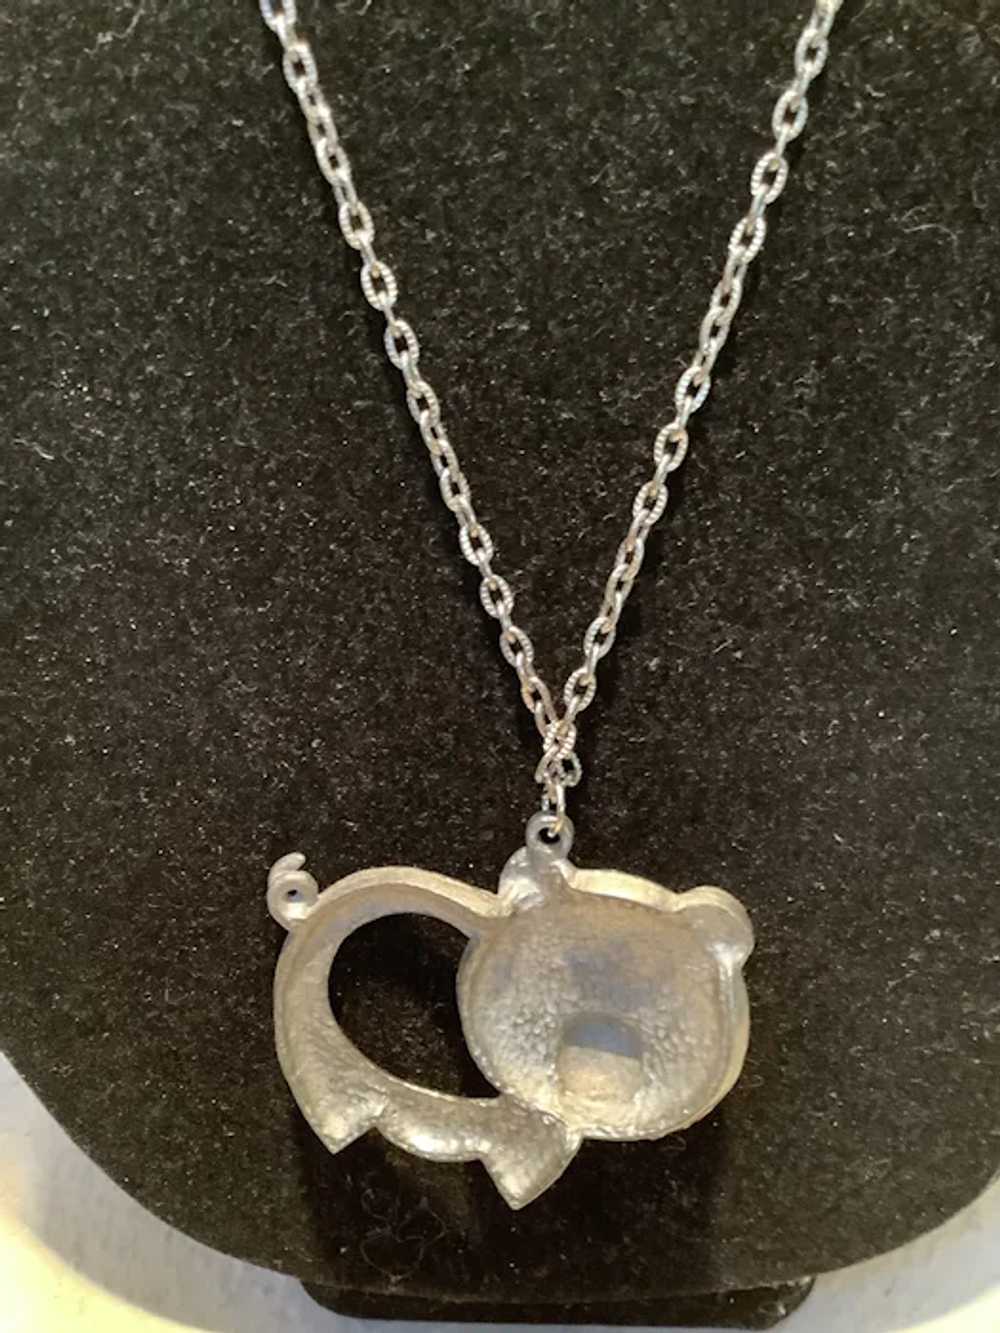 Pewter Pig Pendant on Silver Tone 24” Chain - image 4